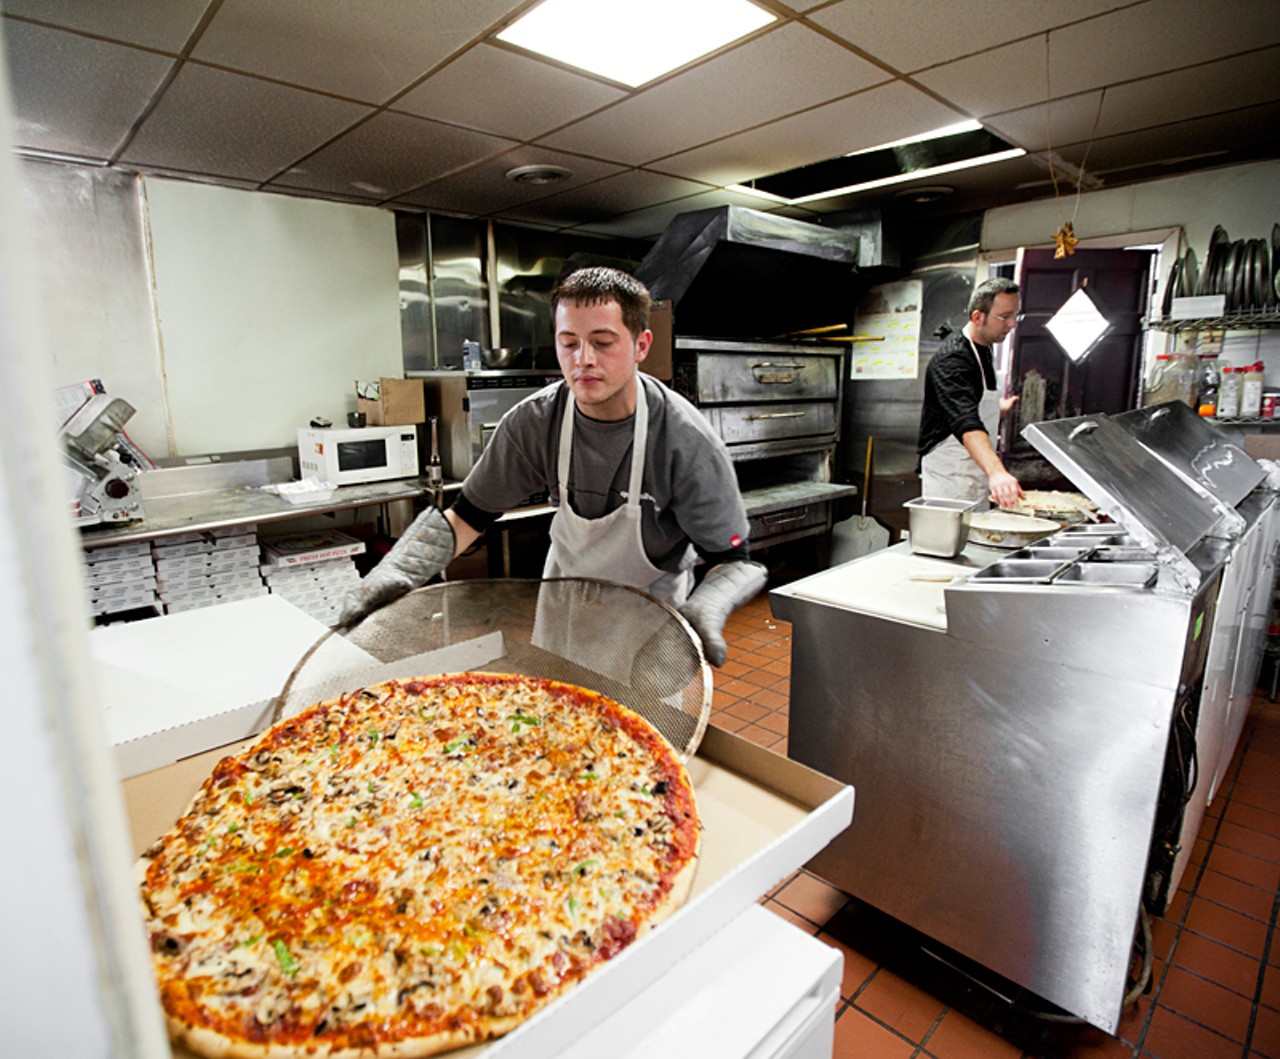 The 30" pizza, known as "the big one" at Mr. X's Pizza.